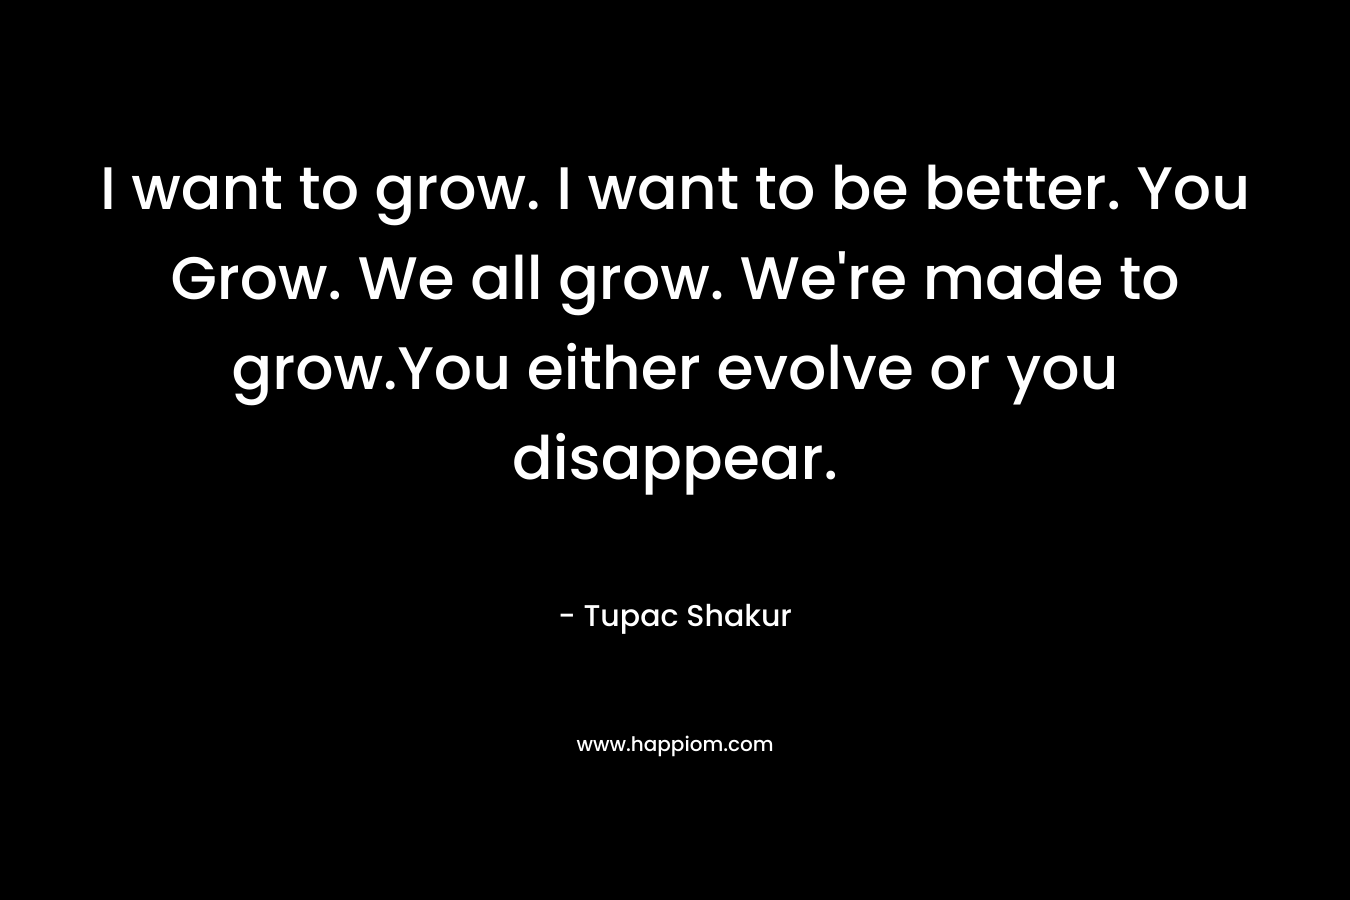 I want to grow. I want to be better. You Grow. We all grow. We're made to grow.You either evolve or you disappear.